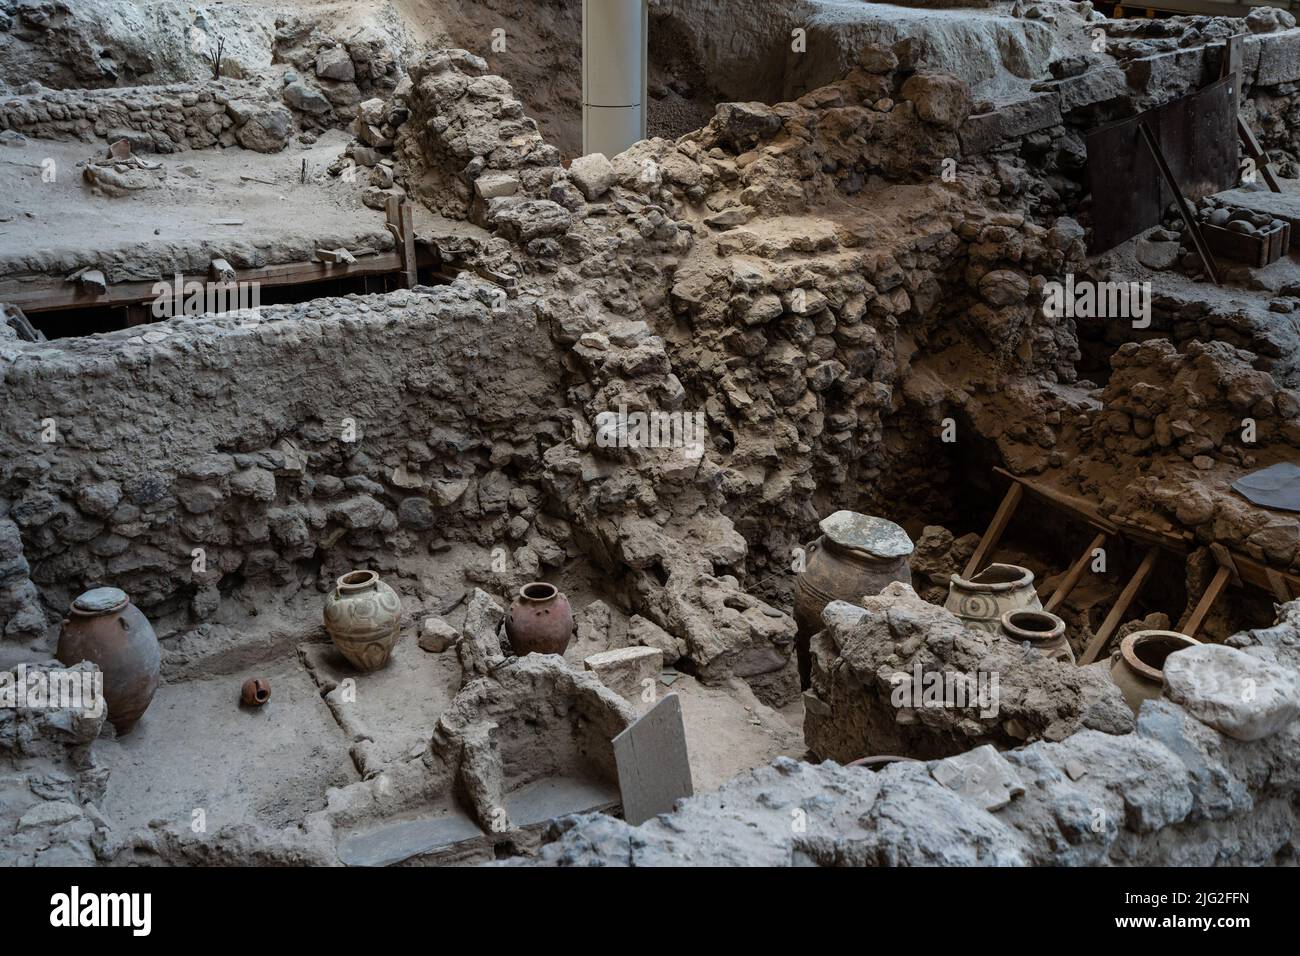 View of the archaeological site of Akrotiri, an ancient Minoan city destroyed in 16th century and popular tourist destination in Santorini, Greece Stock Photo